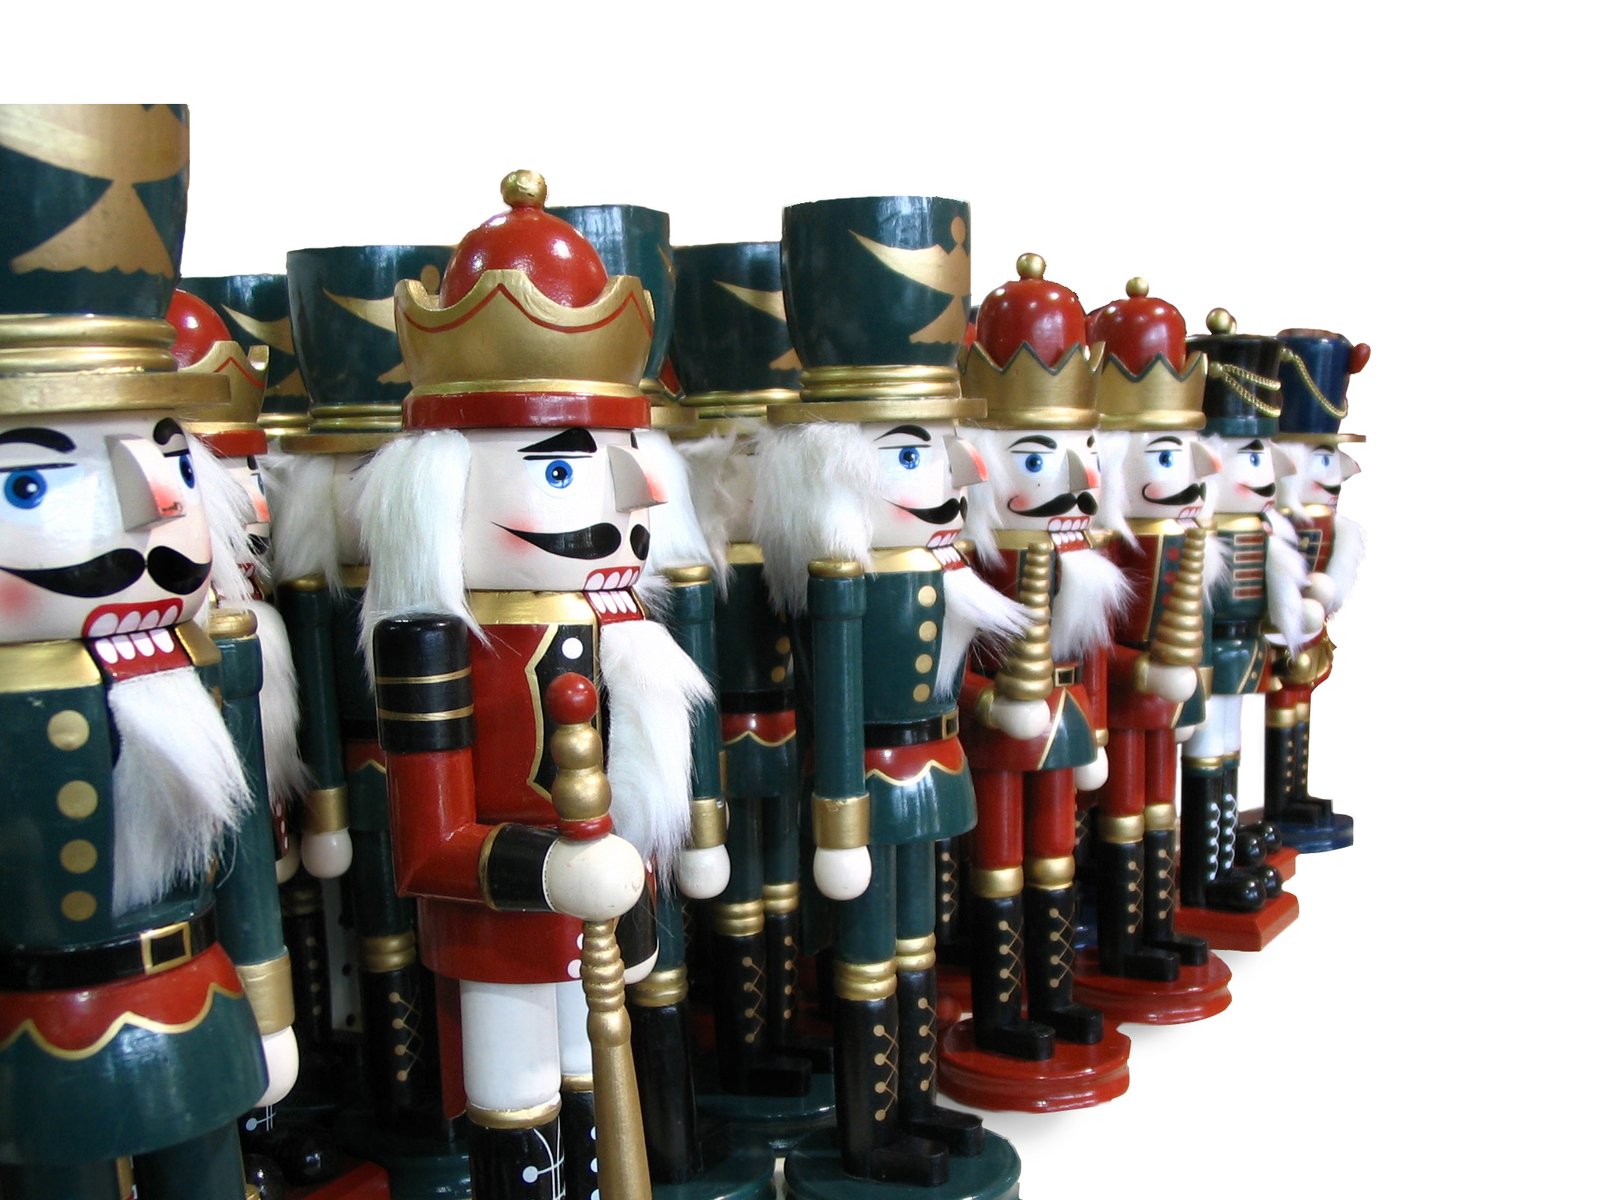 many different wooden toy nuters lined up on a white surface